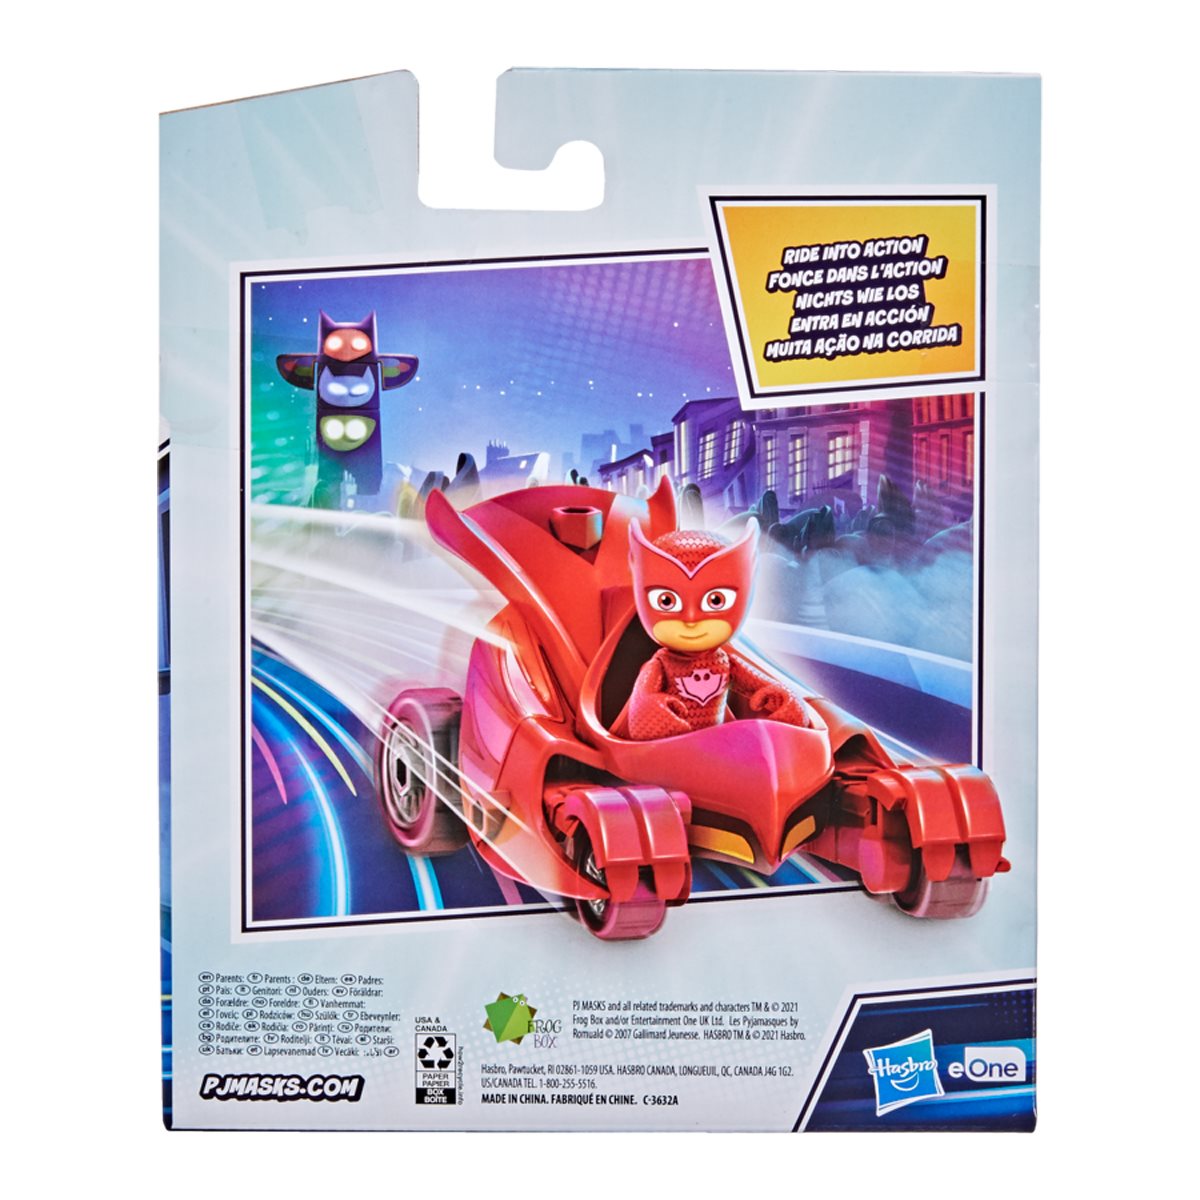  PJ Masks 3-in-1 Combiner Jet Preschool Toy, PJ Masks Toy Set  with 3 Connecting PJ Masks Cars and 3 Action Figures for Kids Ages 3 and Up  : Toys & Games